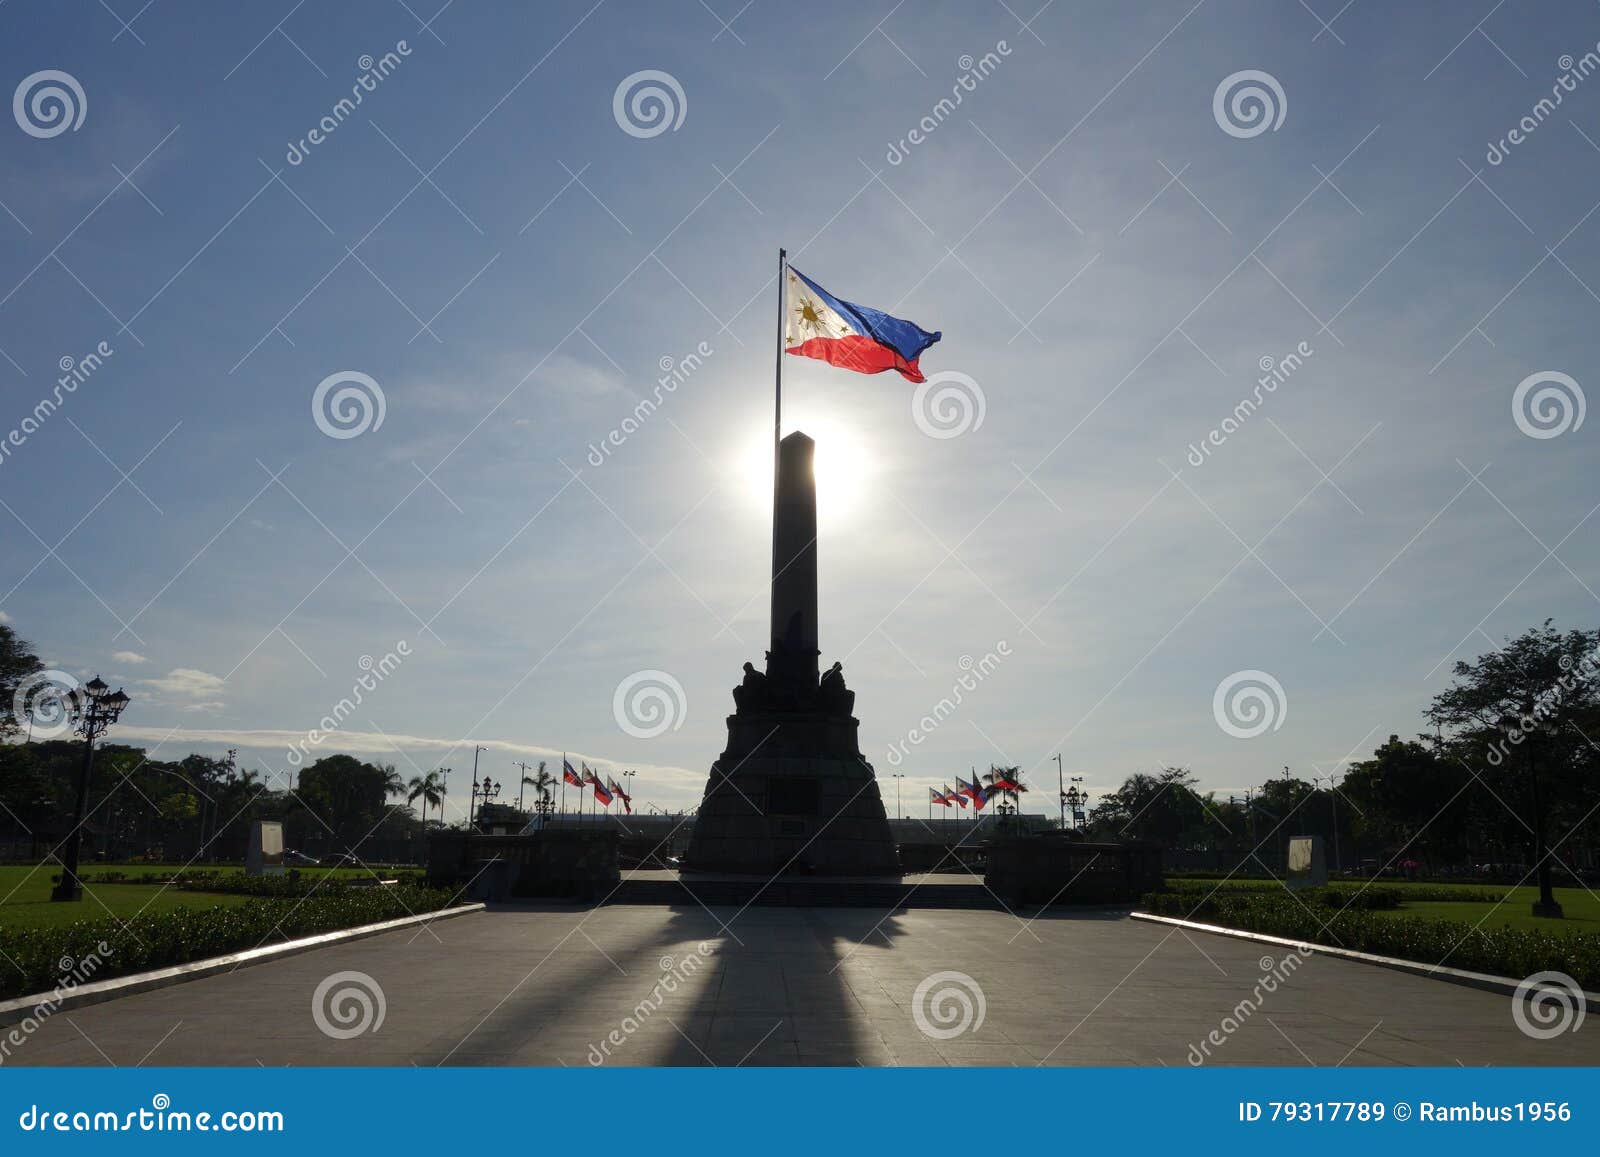 rizal park and philippine flag